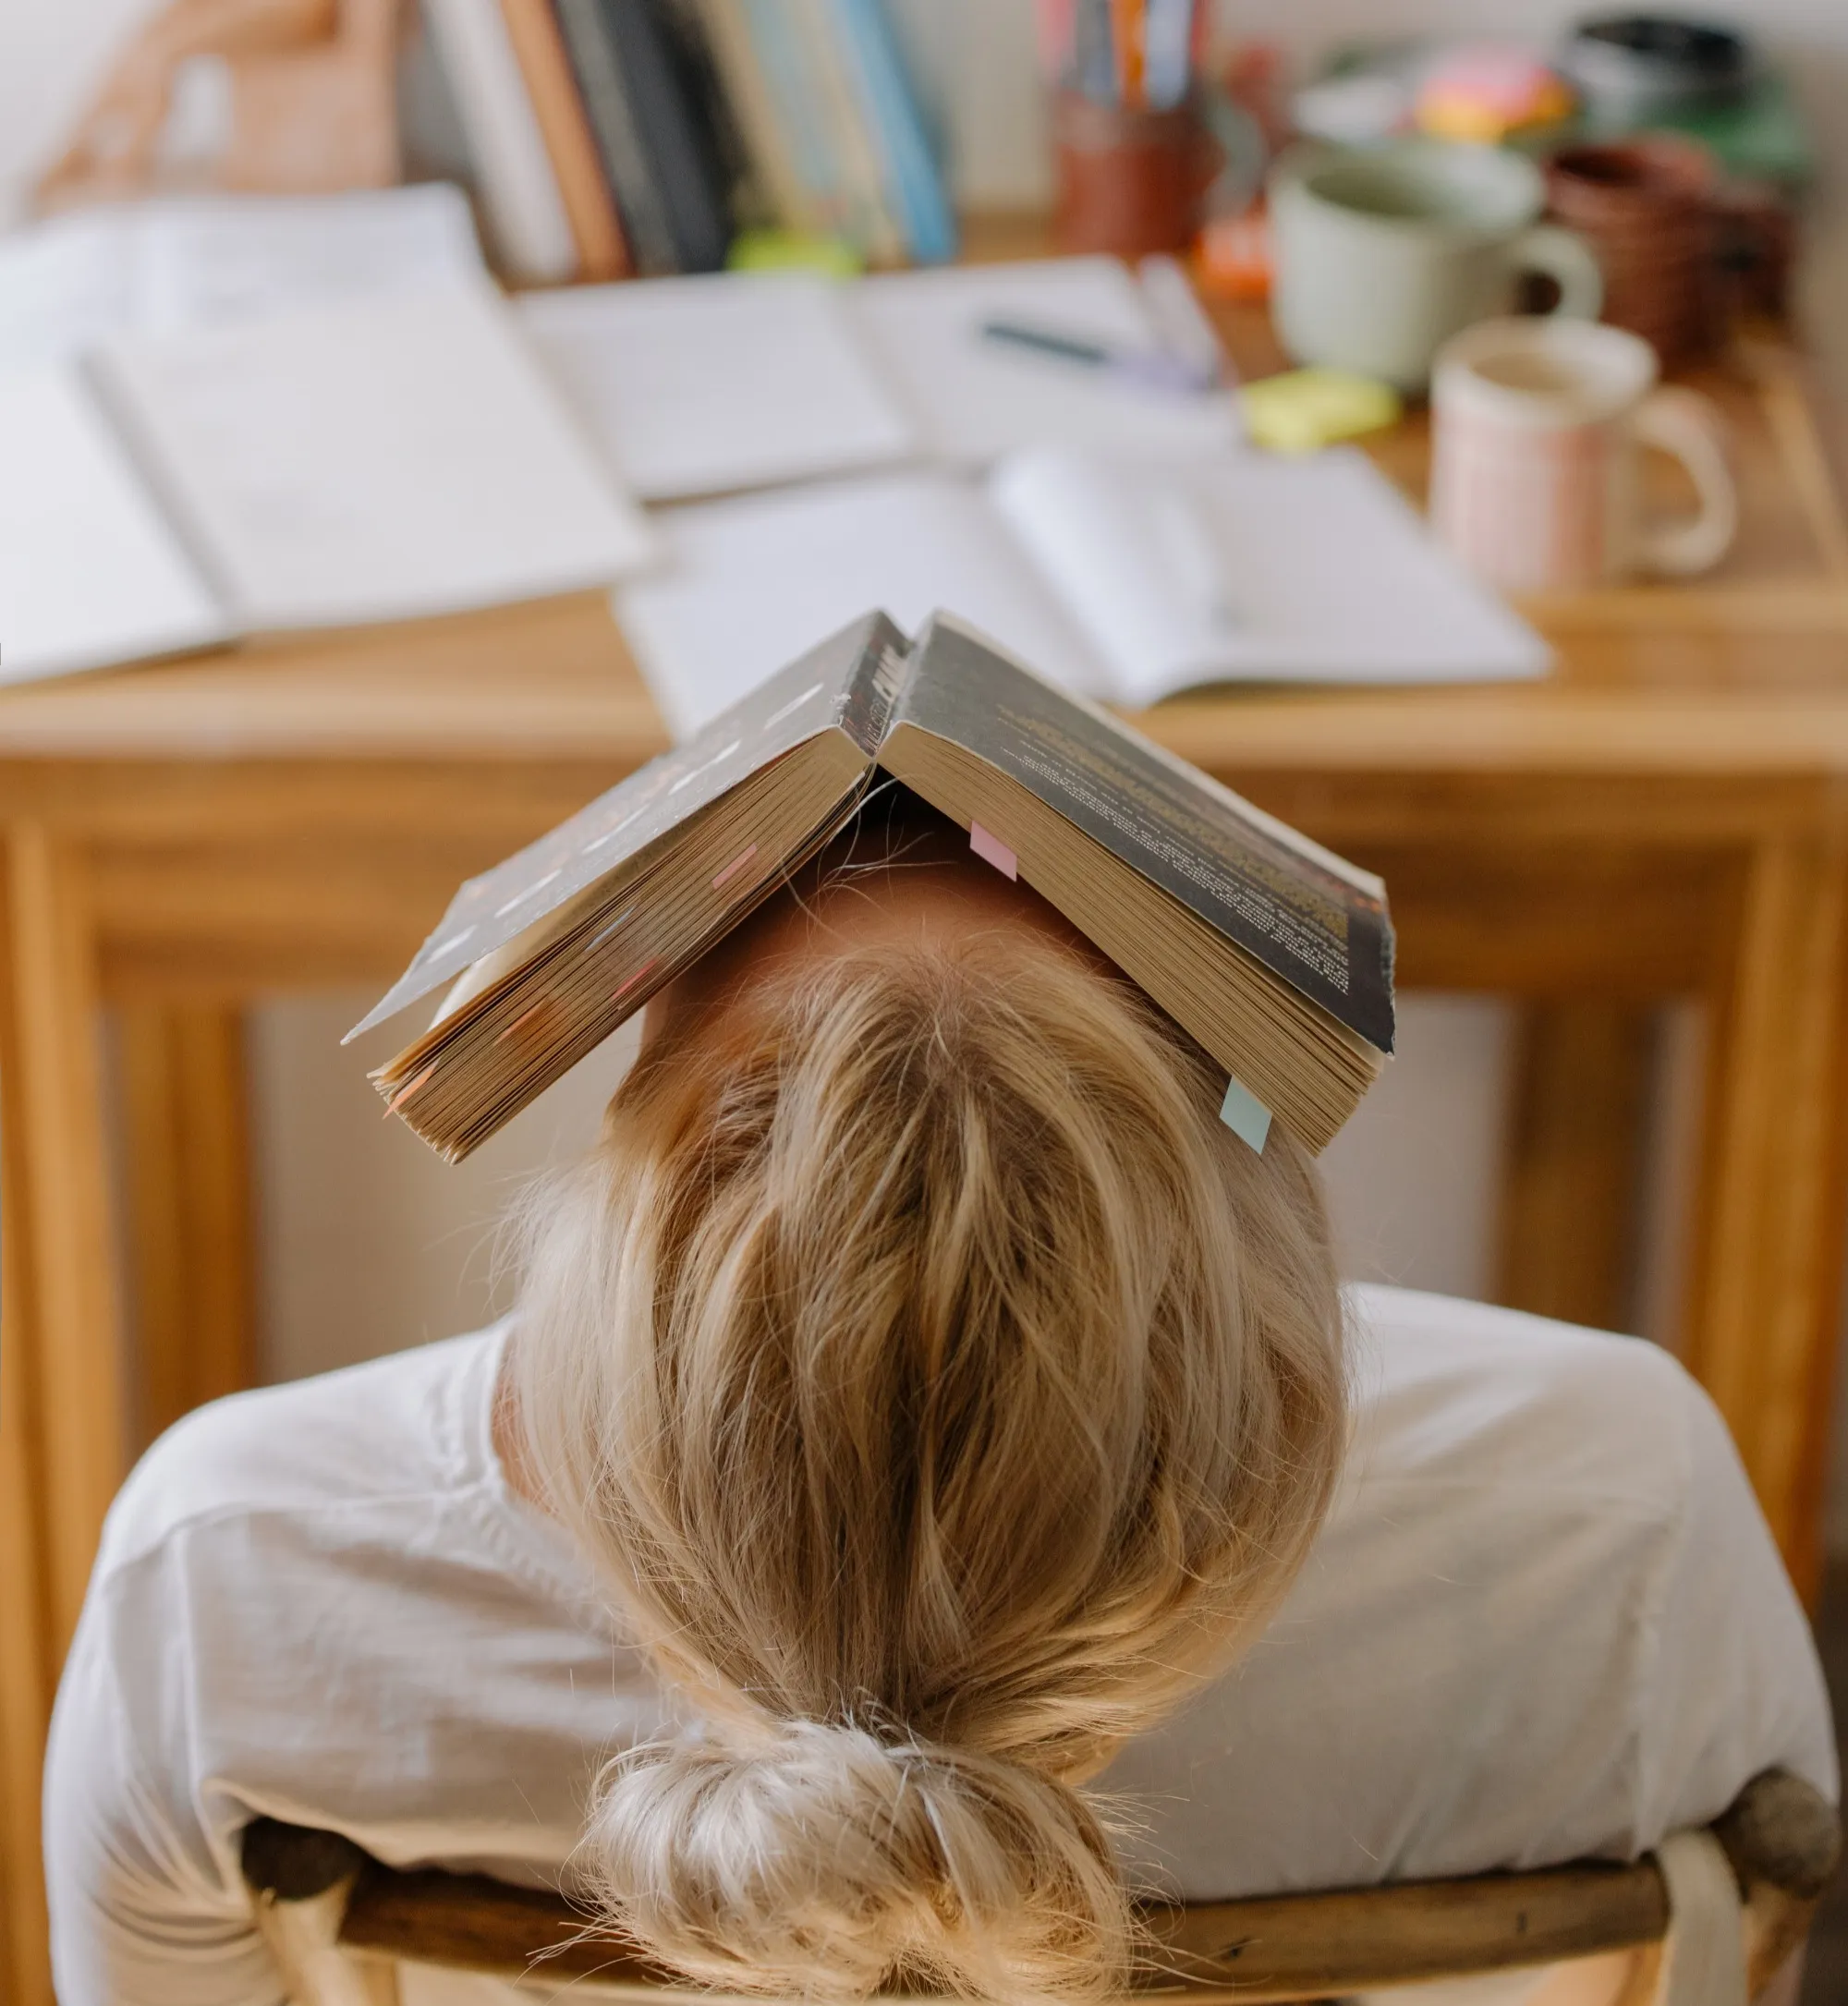 A woman leaning backwards on her chair with a book her head. There is a lot of work in front of her in terms of books and files, she seems totally done.